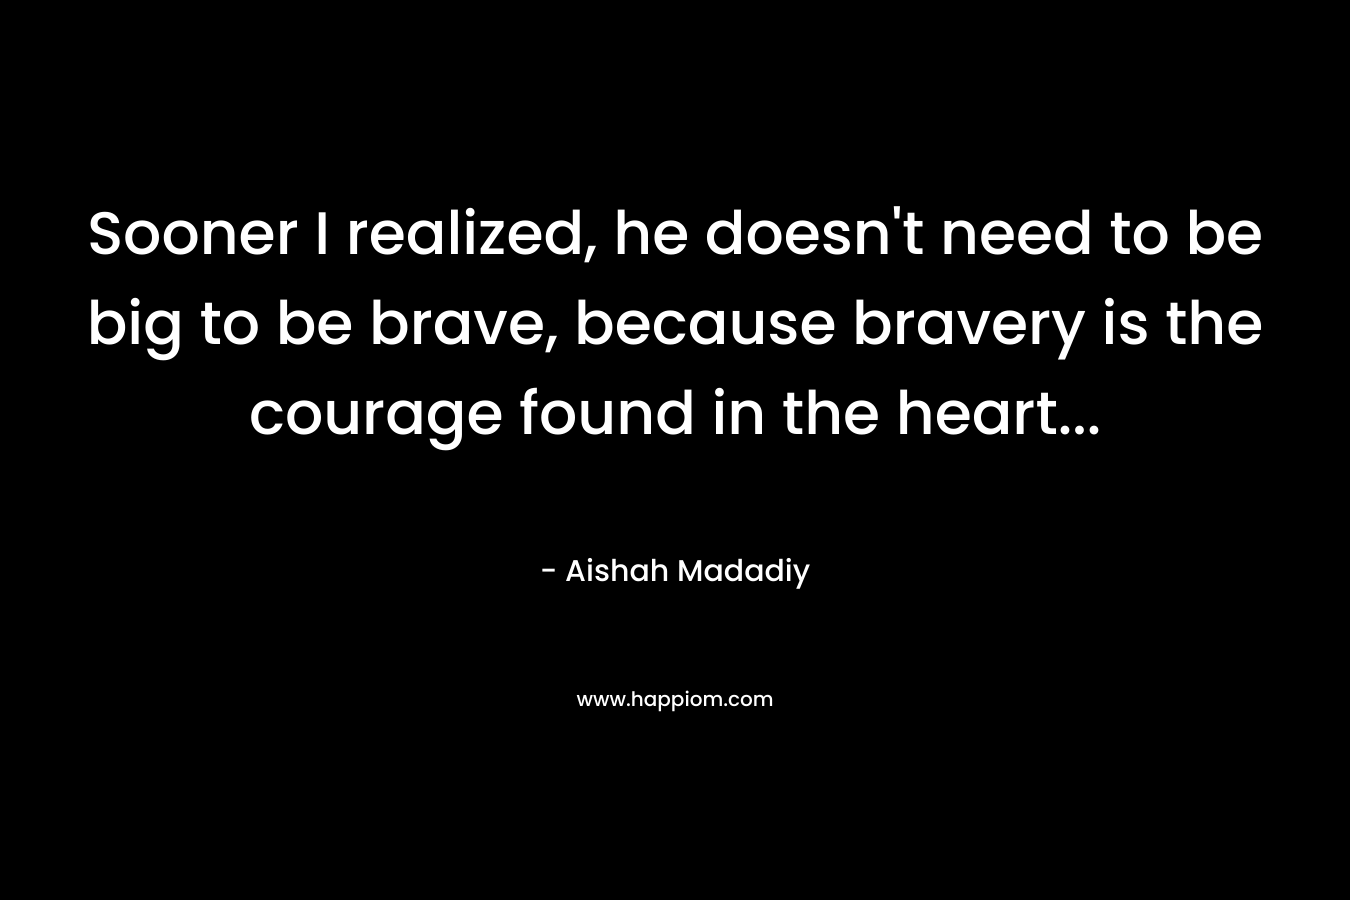 Sooner I realized, he doesn't need to be big to be brave, because bravery is the courage found in the heart...